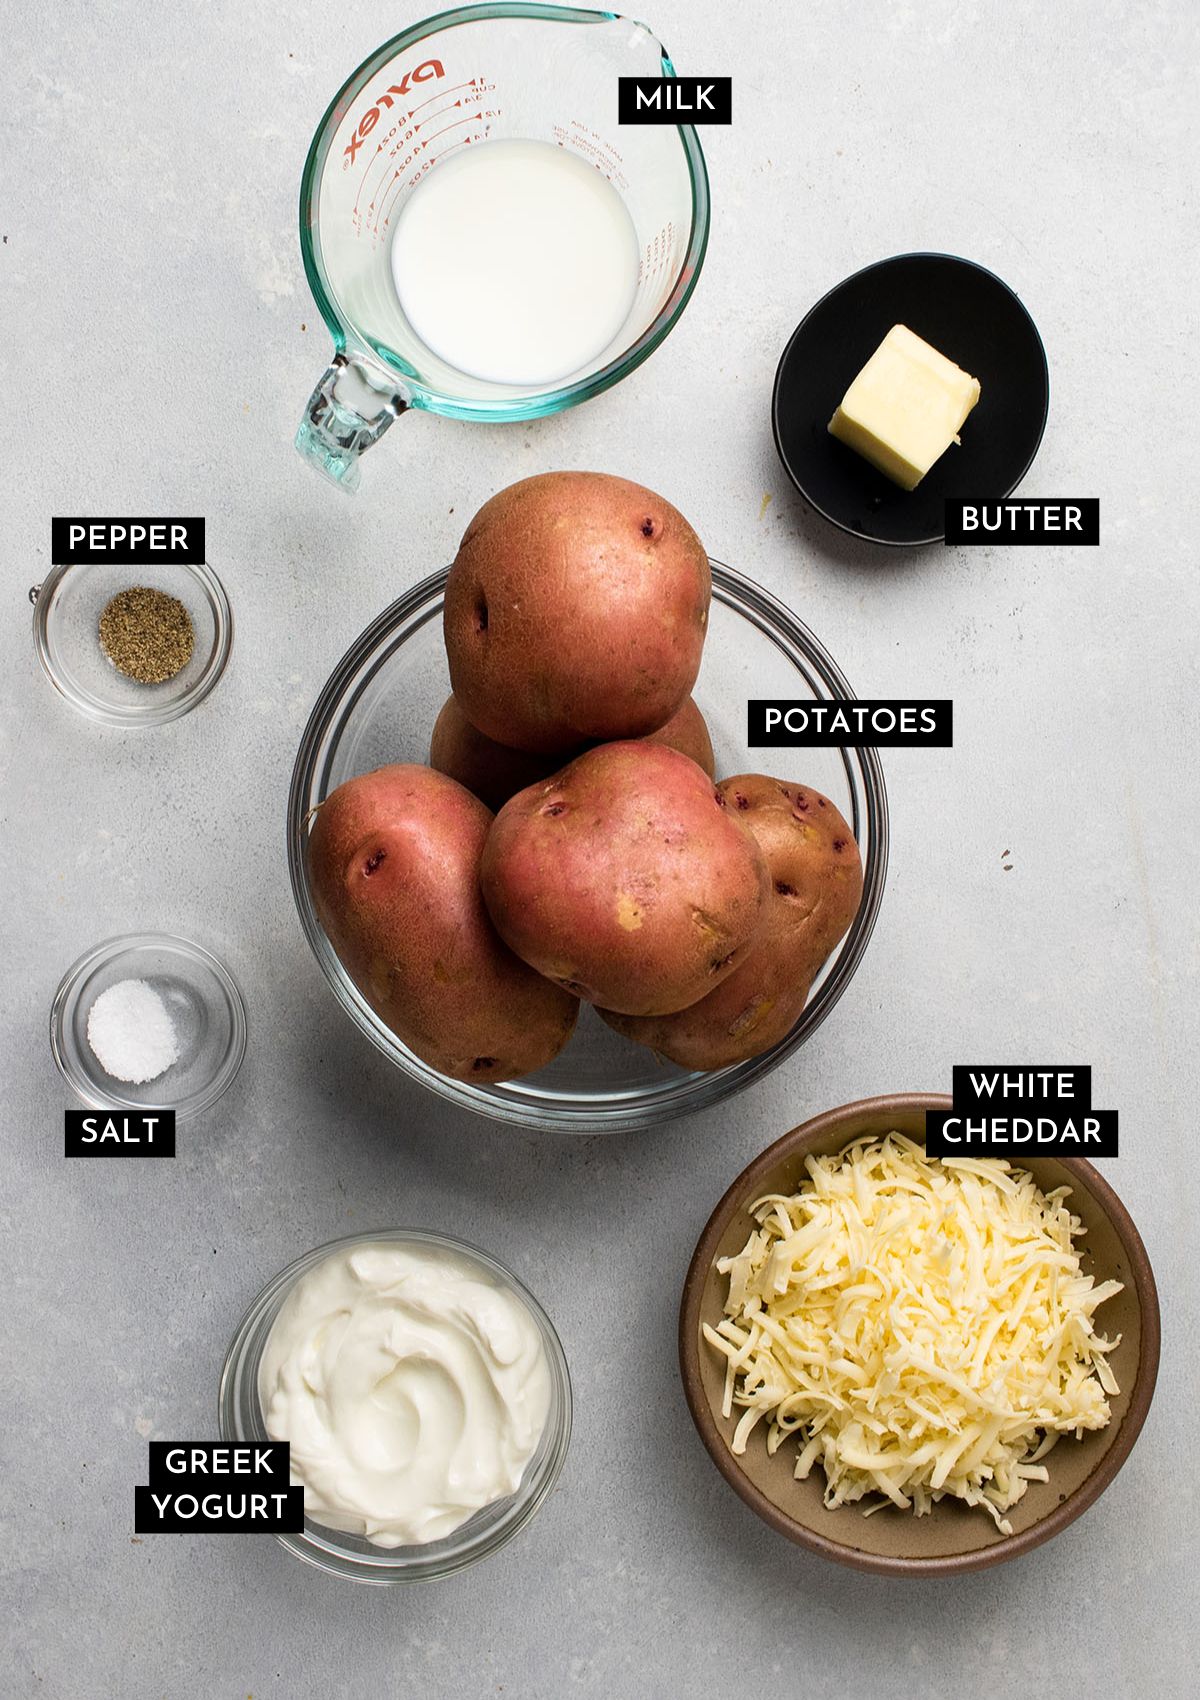 Red potatoes, cheddar cheese, and greek yogurt in small bowls on a white table.